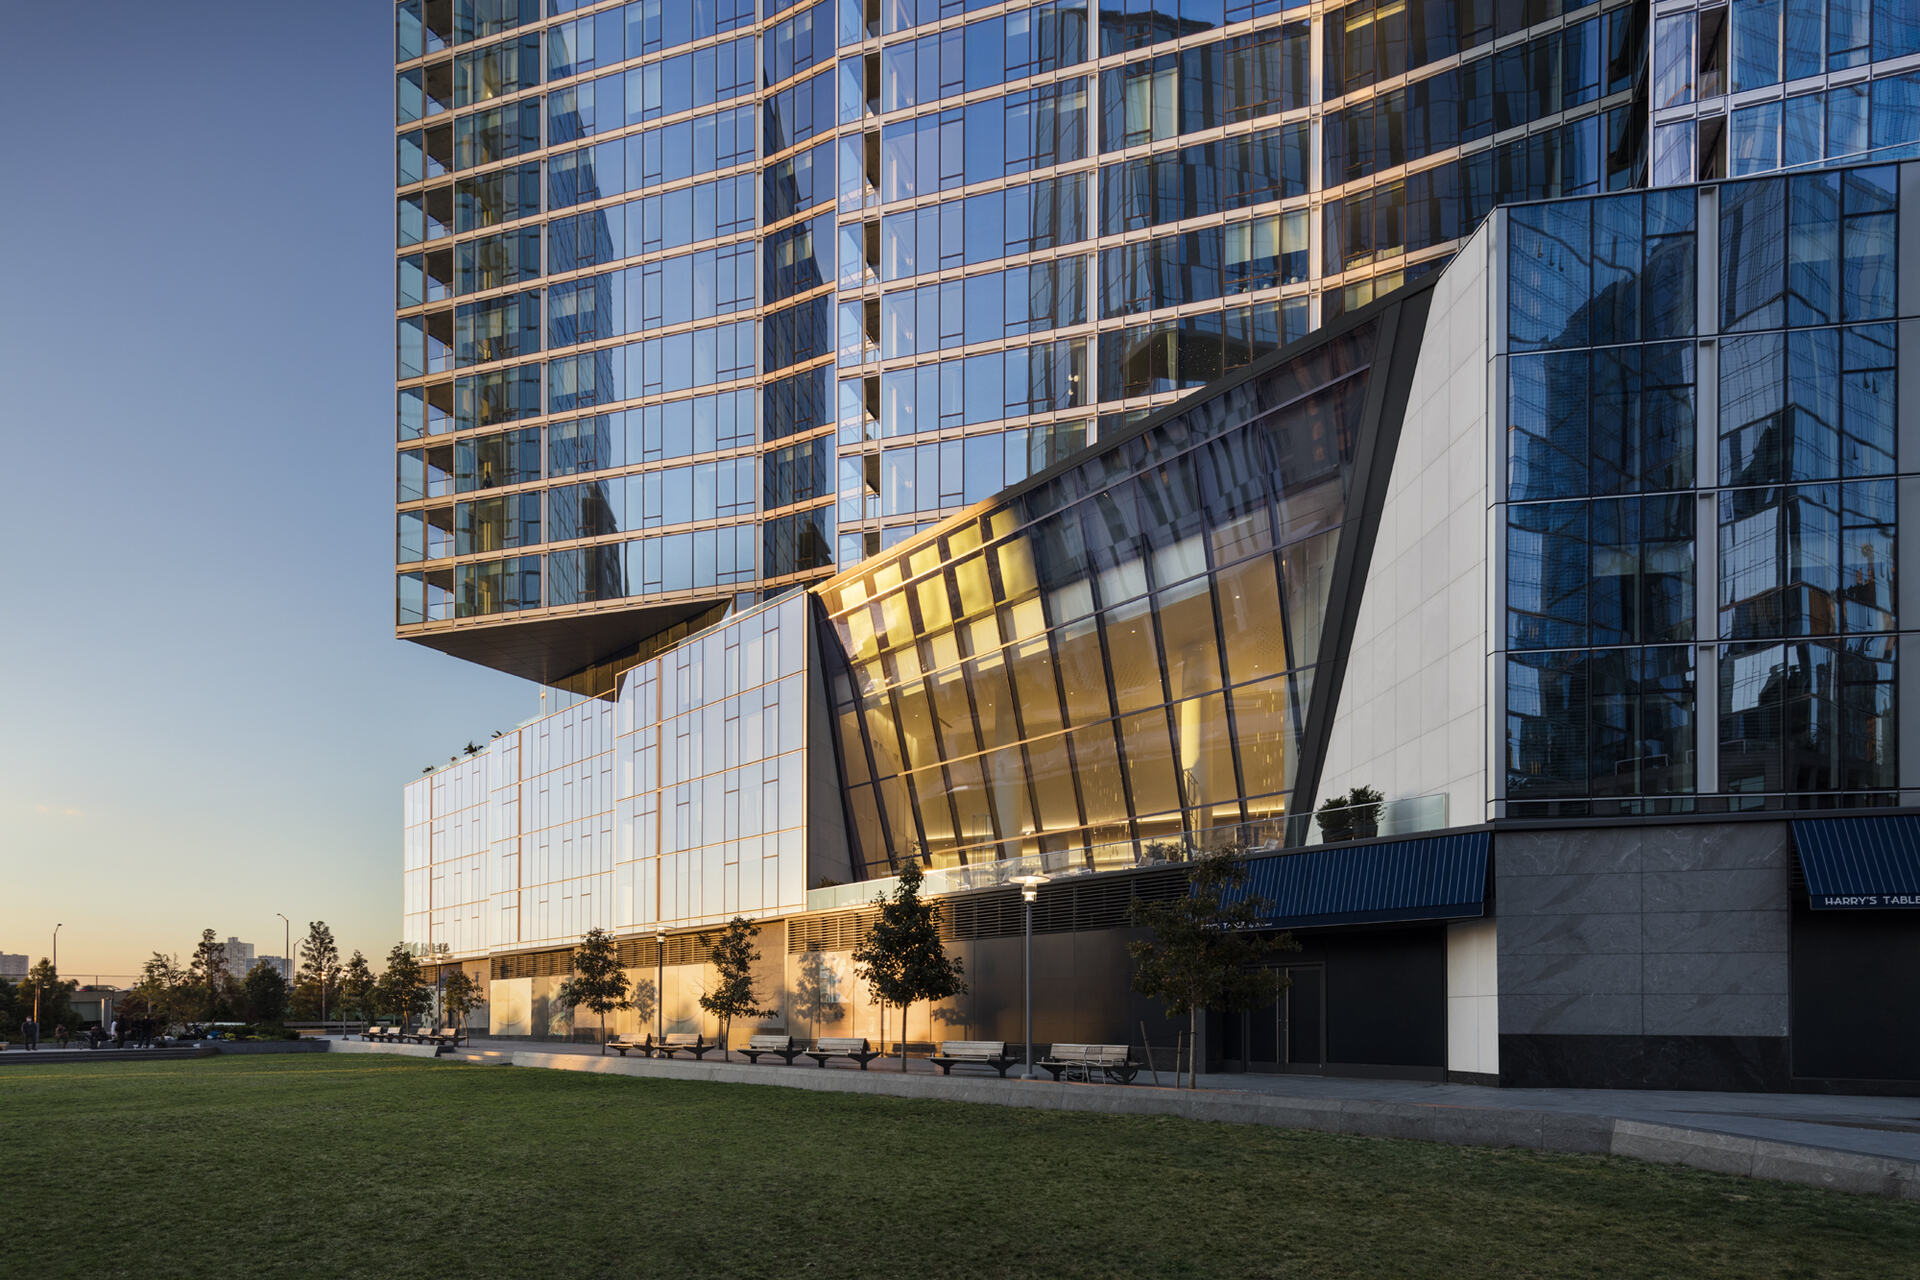 Modern architecture meets golden hour: a sleek glass building basks in the warm glow of the setting sun, reflecting the clear blue sky, as shadows stretch across the manicured lawn.